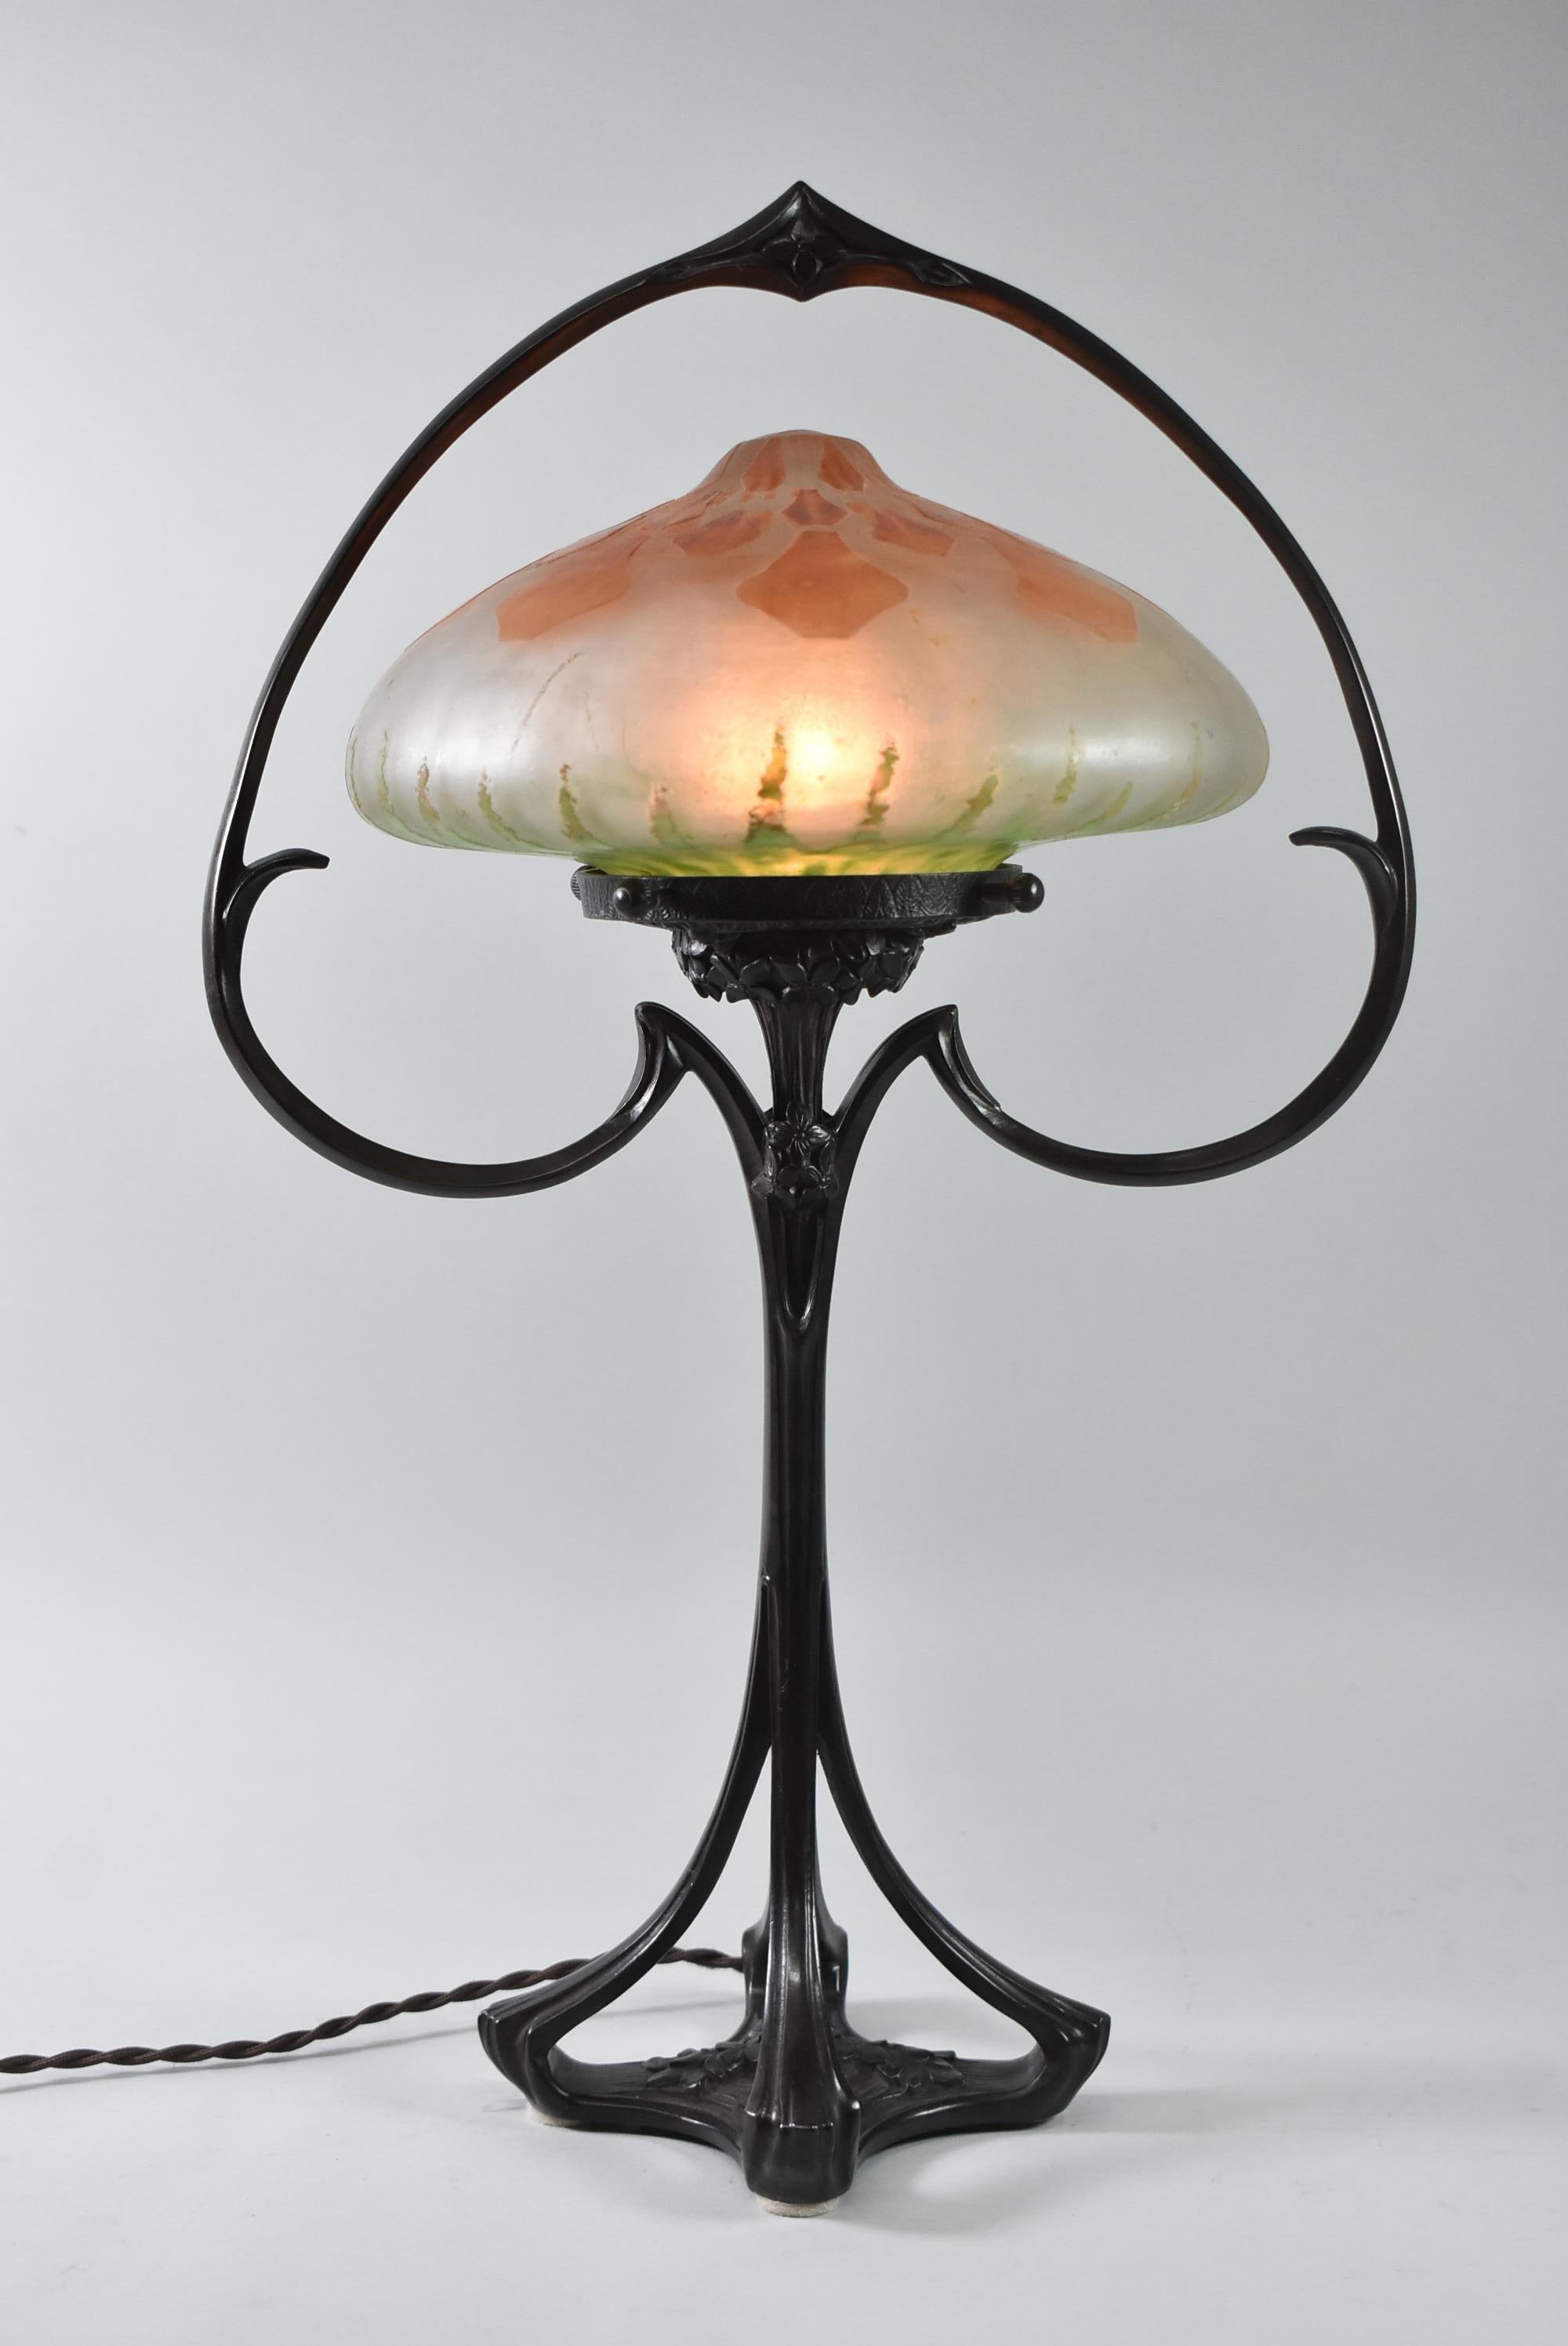 Art Nouveau Table Lamp with Daum Nancy Shade, Circa 1900 France In Good Condition For Sale In Toledo, OH